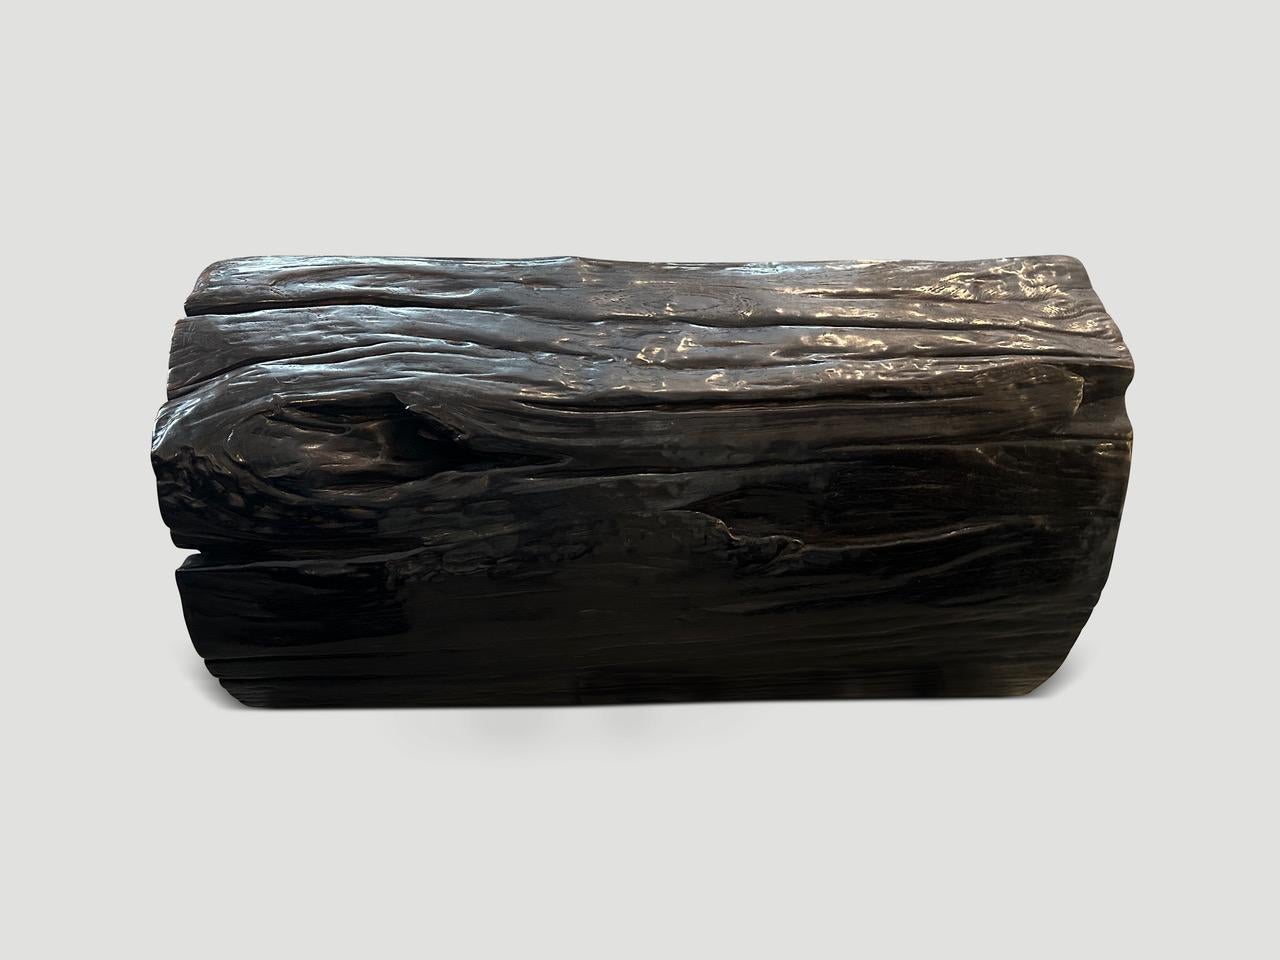 Impressive hollowed out teak wood pedestal or bench. Beautiful unique erosion detail on this one hundred year old wood. We have a pair cut from the same log. The images and price reflect one. As a bench the dimensions are 34 x 17 x 17” high.

Own